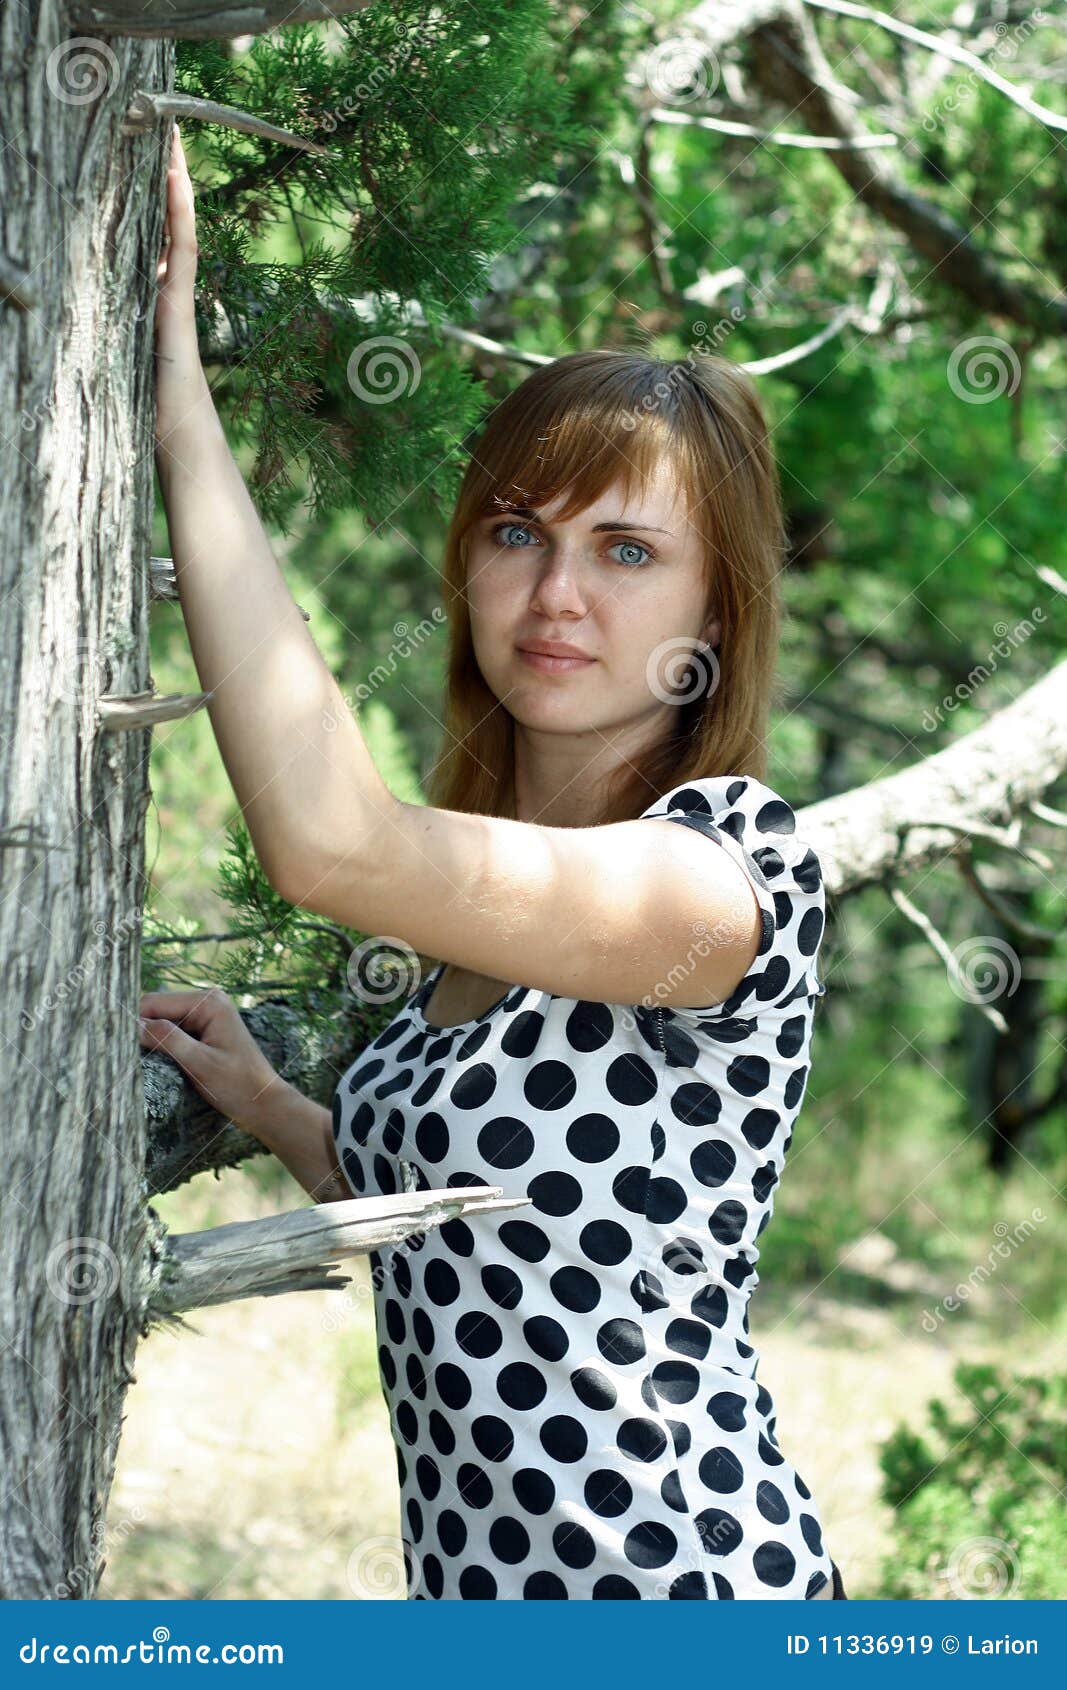 Girl near the tree stock image. Image of discovery, leisure - 11336919